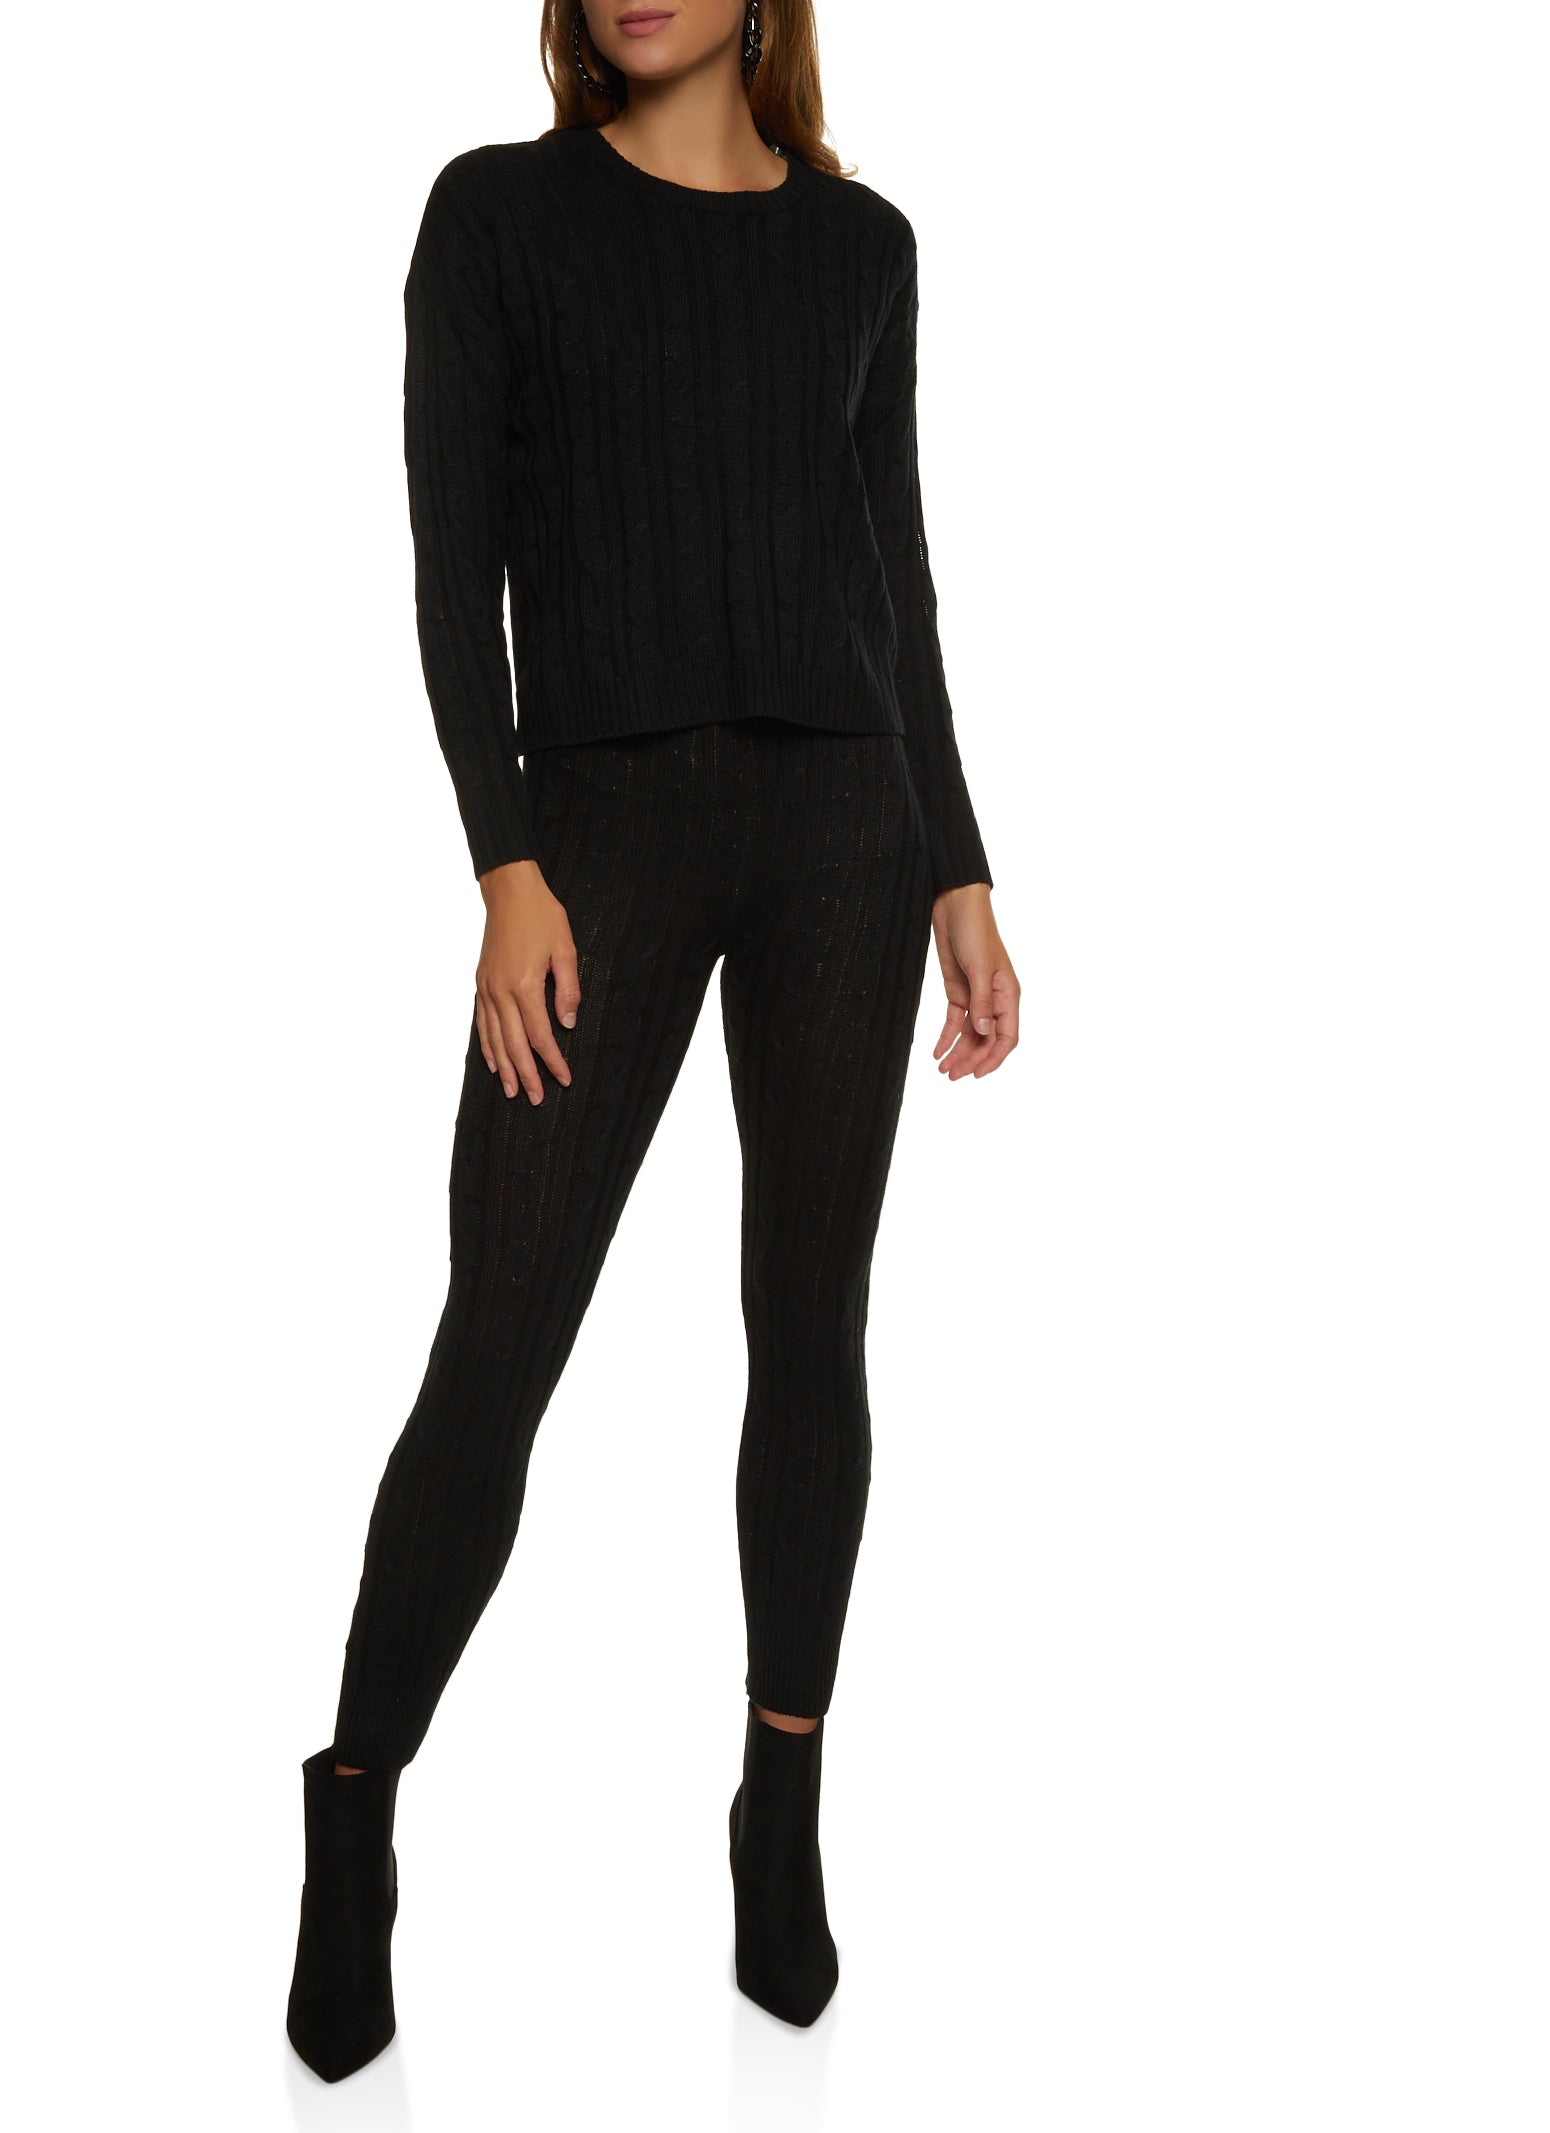 Black Cable Knit Legging And Sweater Set